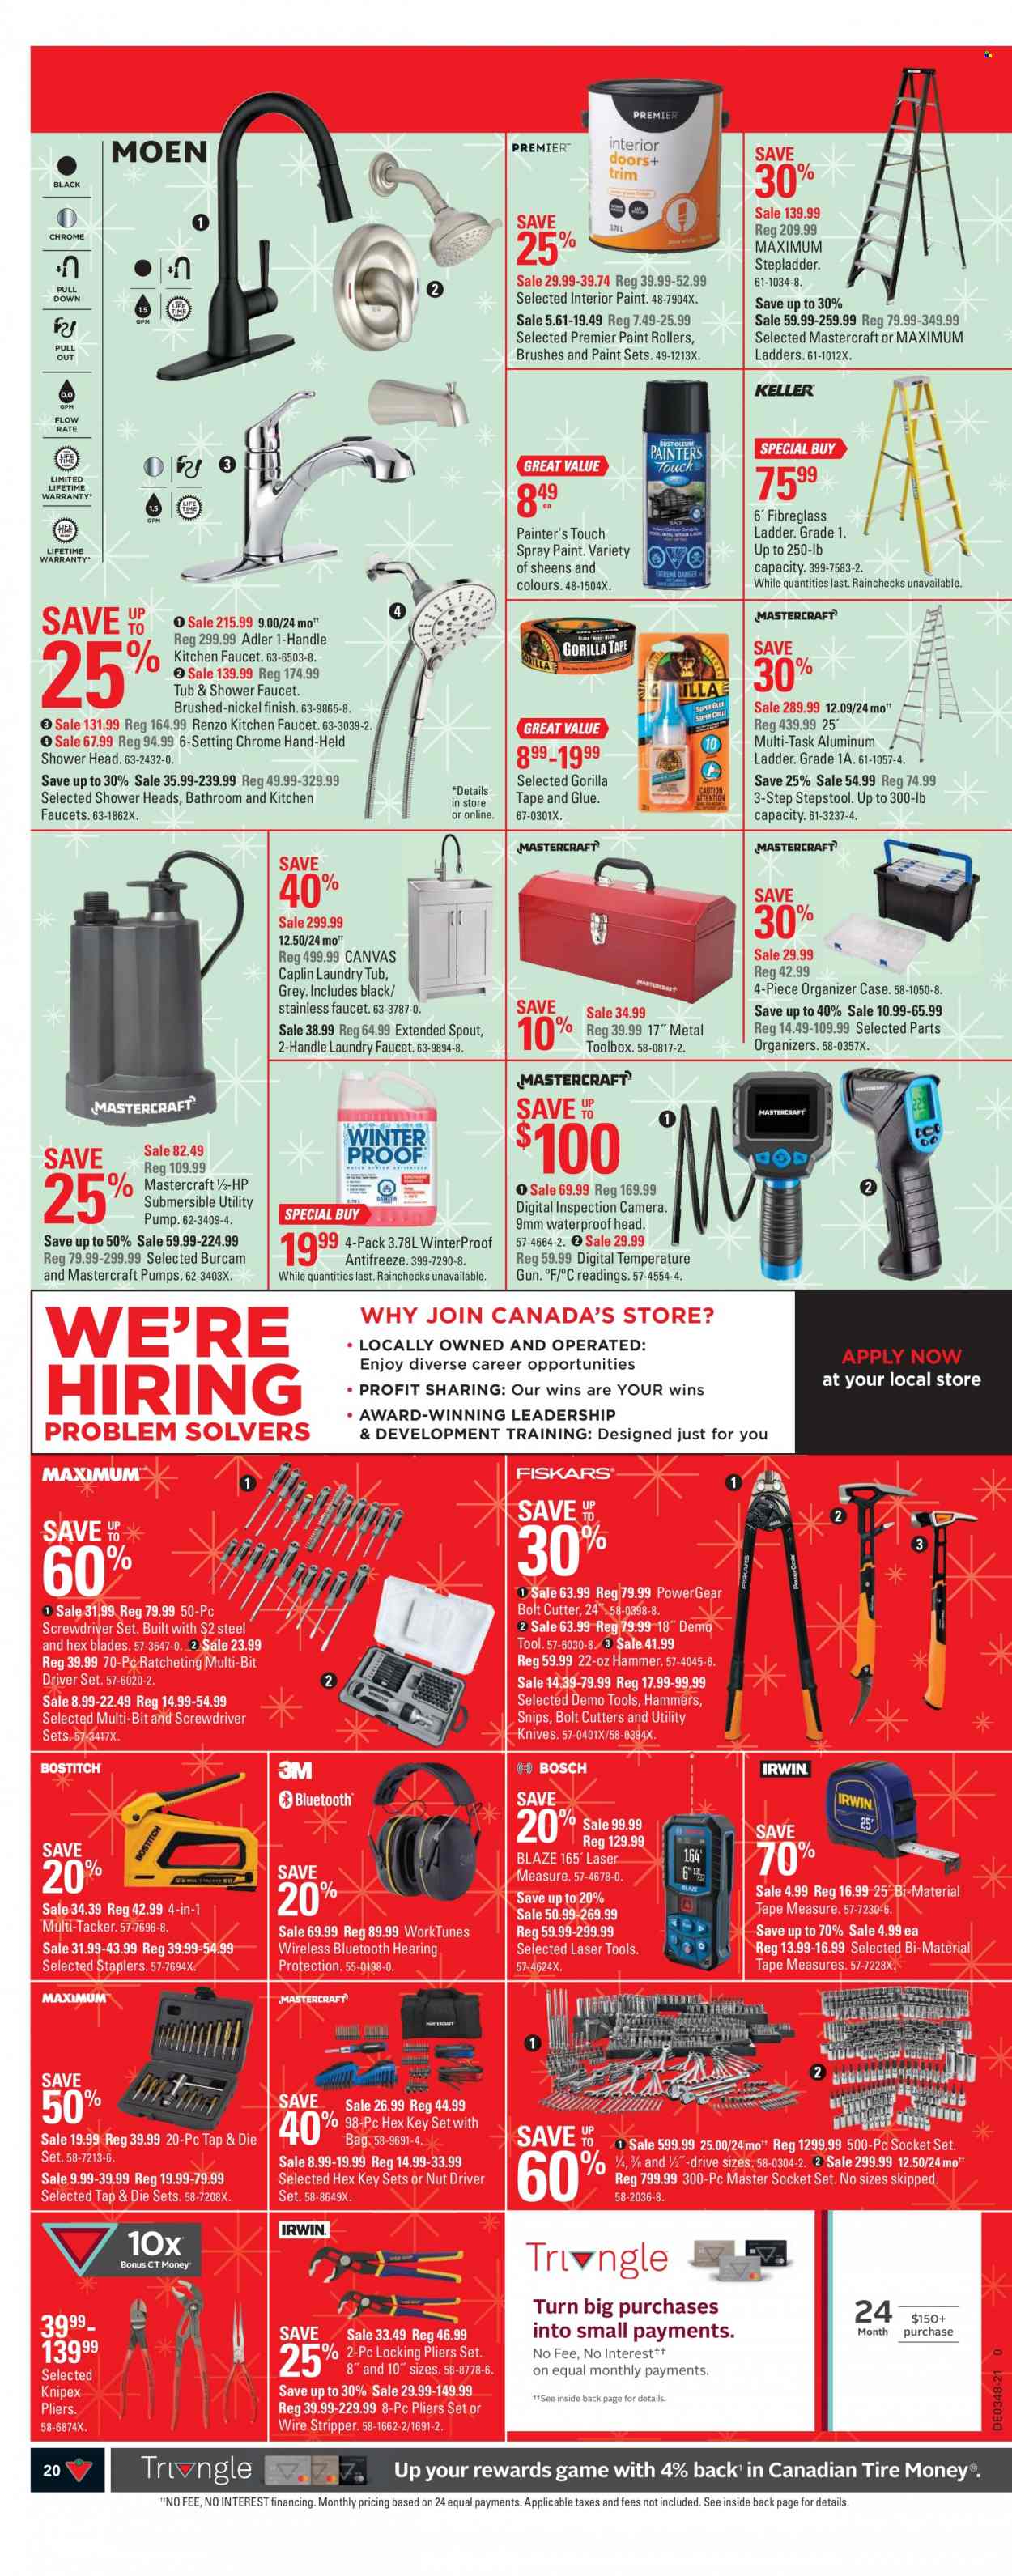 thumbnail - Canadian Tire Flyer - November 26, 2021 - December 02, 2021 - Sales products - bag, knife, glue, cutter, canvas, gun, hammer, ladder, stepladder, faucet, showerhead, spray paint, screwdriver, snips, pliers, tool box, socket set, bolt cutter, screwdriver set, measuring tape, hearing protection, antifreeze, camera. Page 20.